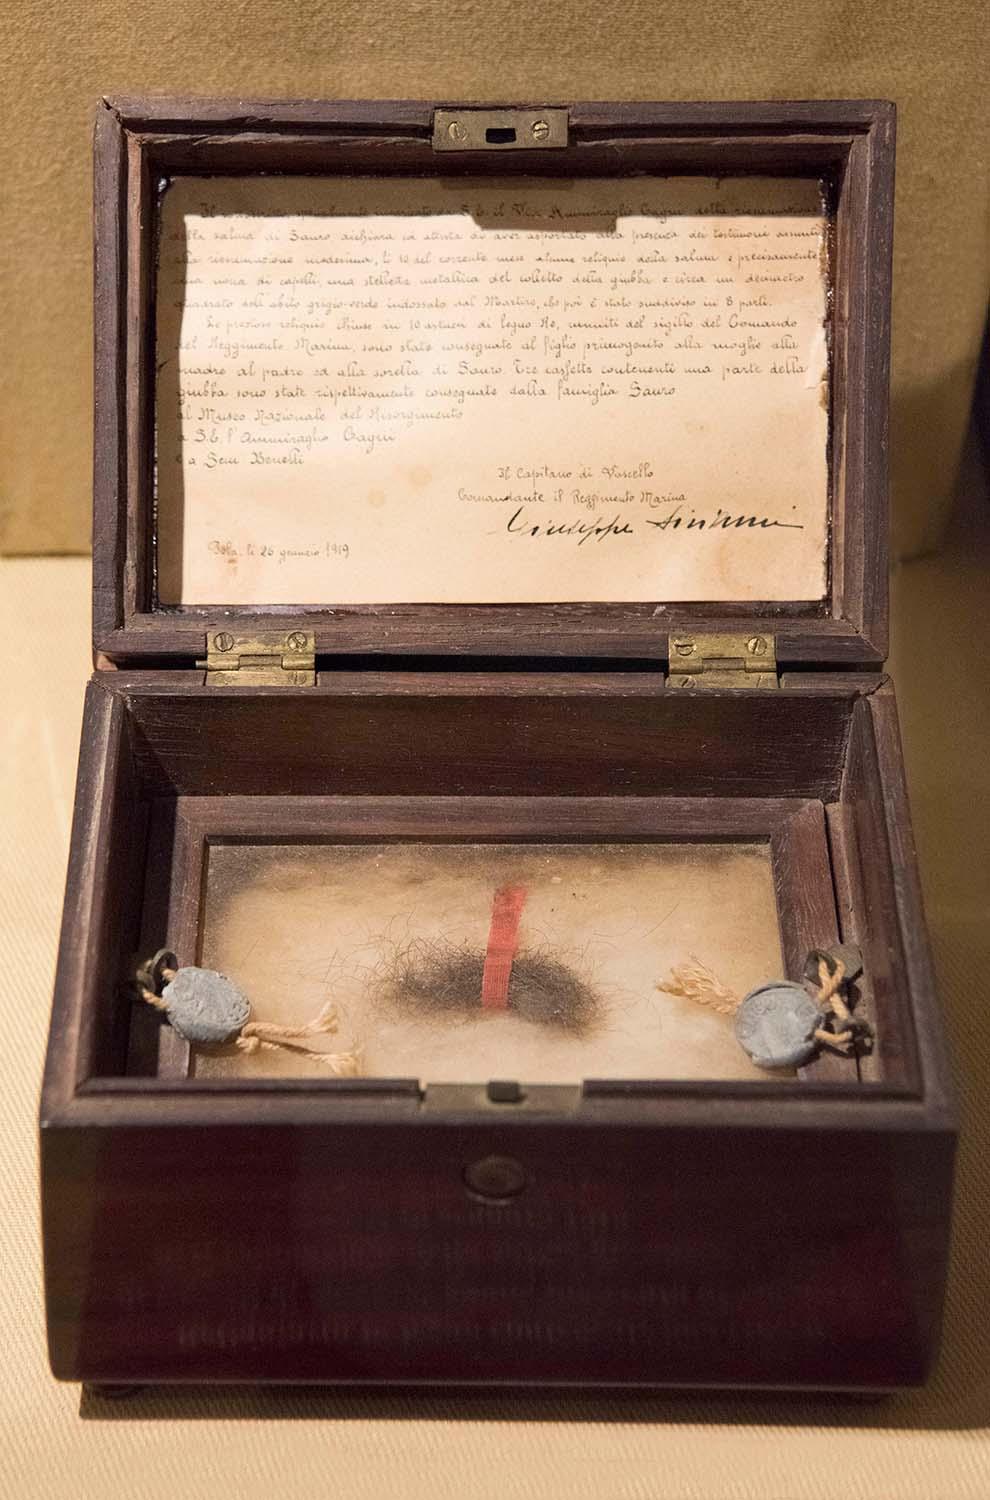 Reliquary with a lock of Nazario Sauro’s hair